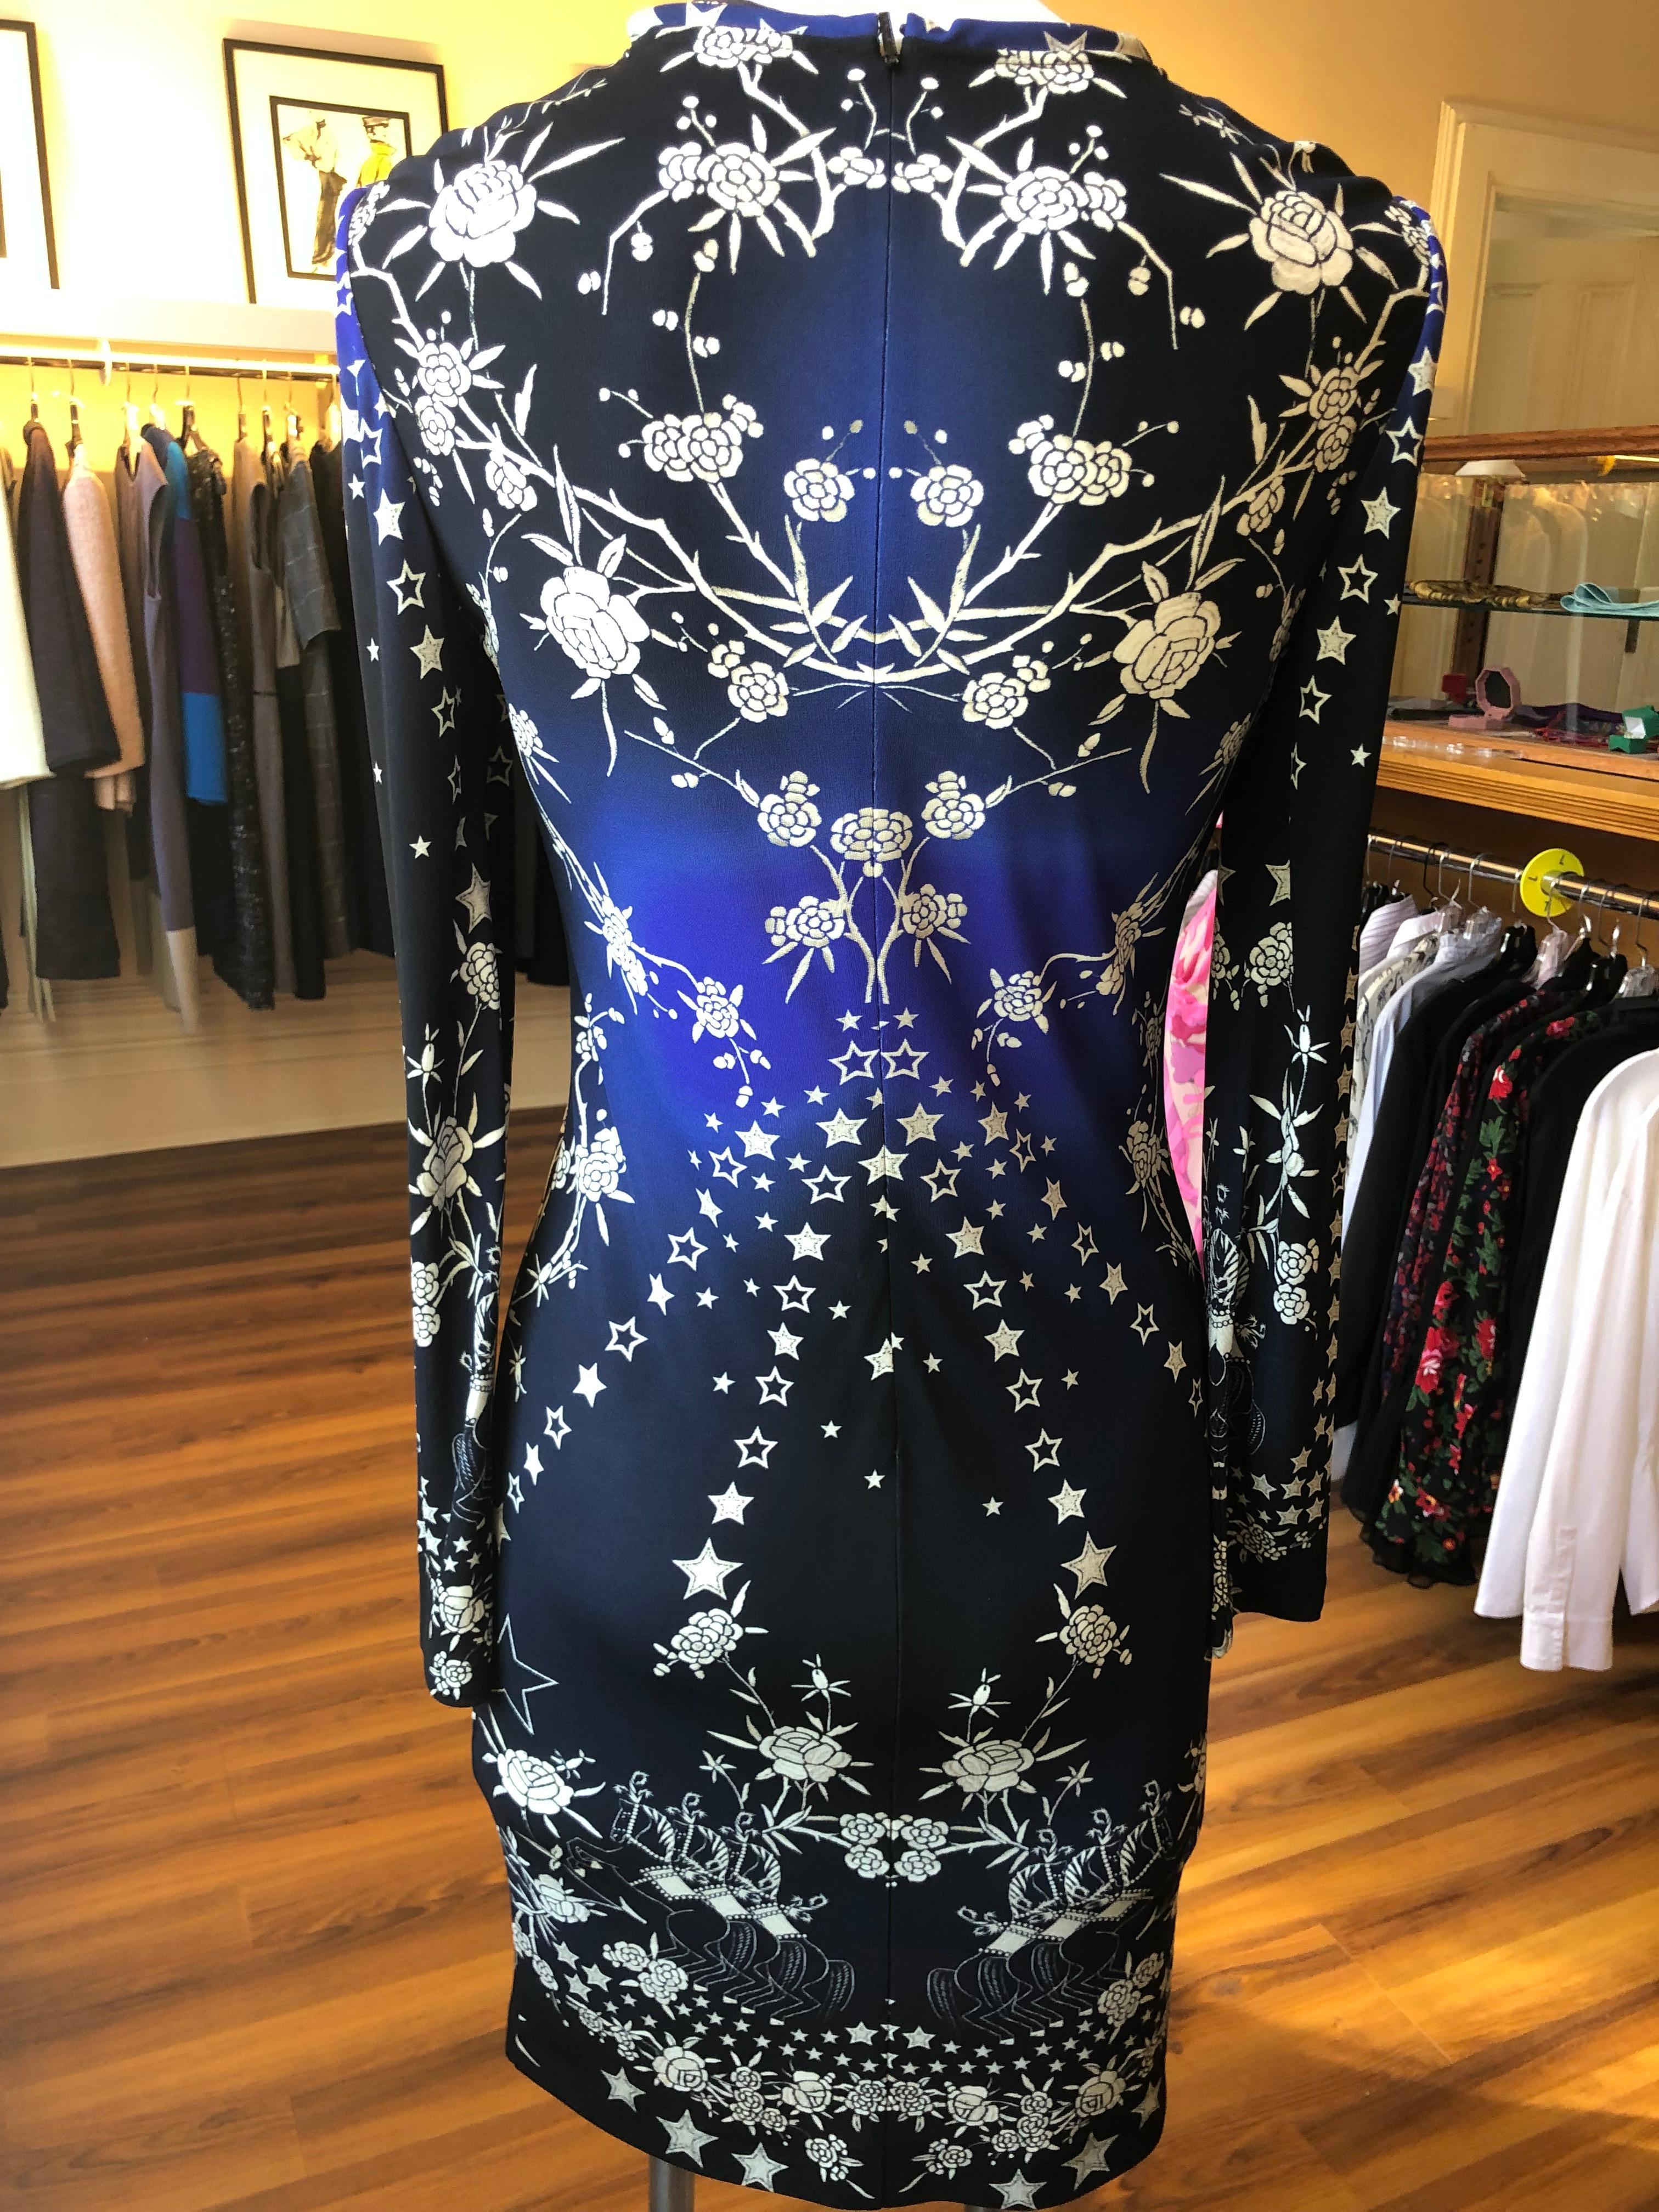 This is a Roberto Cavalli long sleeved blue ombre viscose jersey dress, with a crew neckline. The dress is floral and star printed with bonus horse print at the bottom.

This dress is very comfortable and easy to travel with.